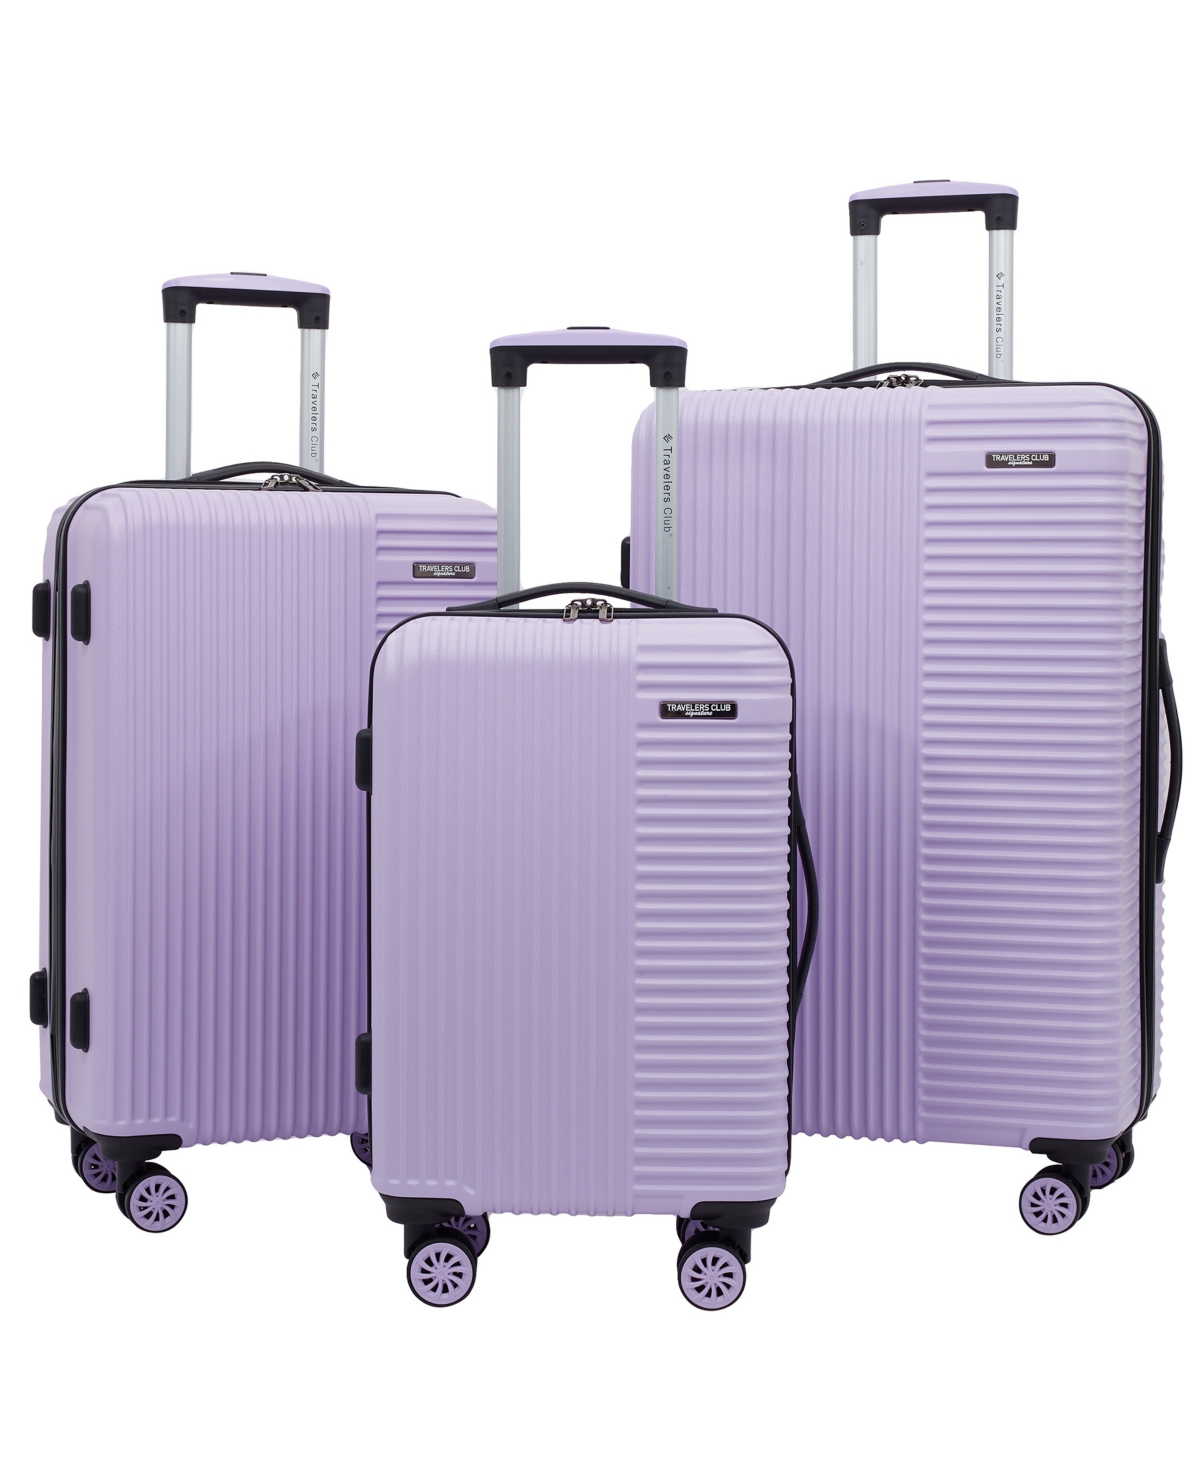 Travelers Club Basette 3-pc. Hardside Luggage Set, Created For Macy's In Lilac